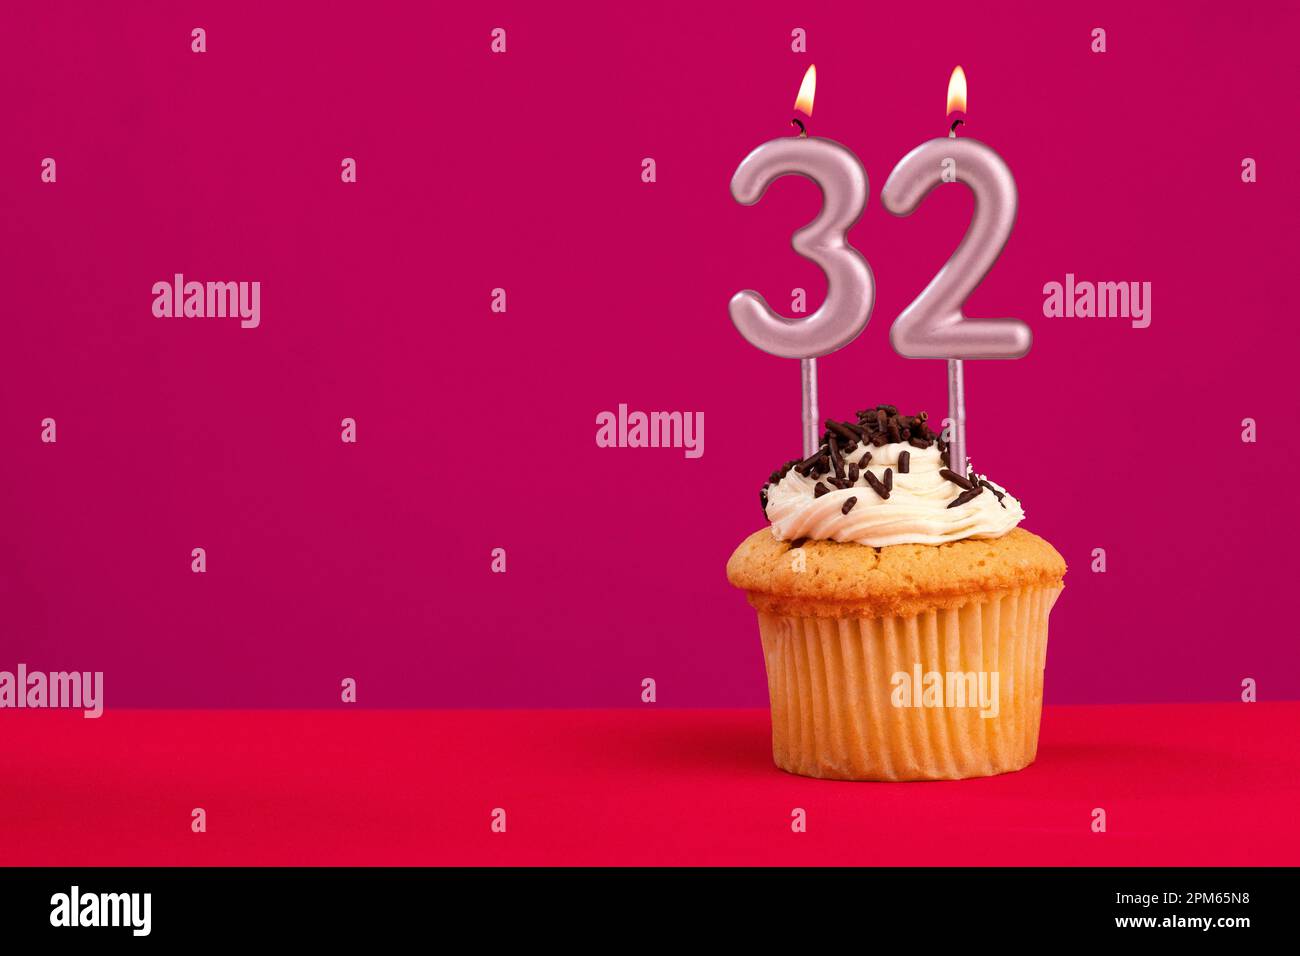 Candle number 32 - Cake birthday in rhodamine red background Stock ...